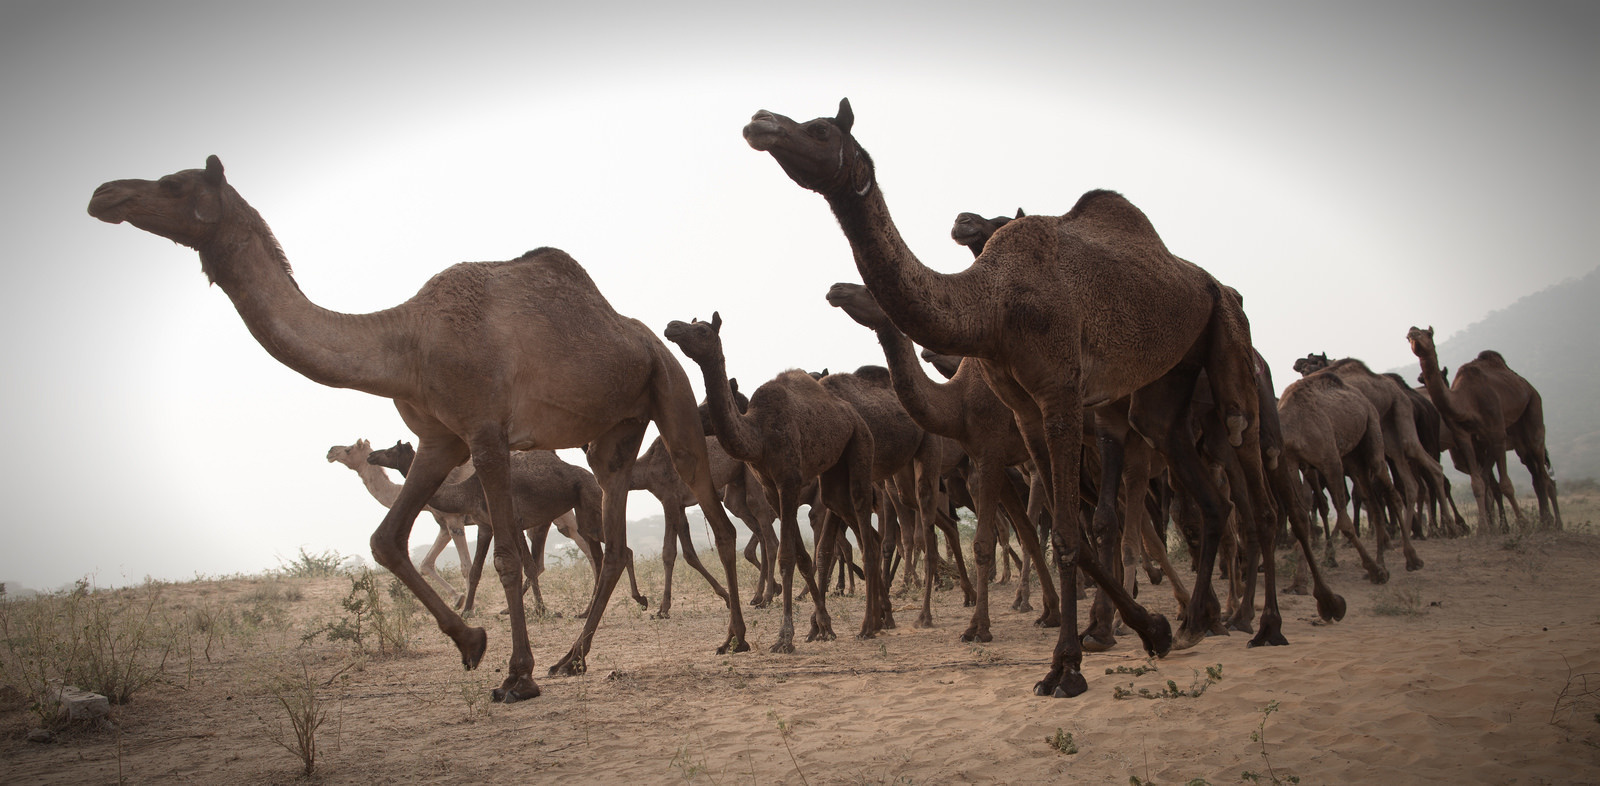 In 2009, the town of Docker River in Australia was under siege when 6,000 camels went in search of water. 